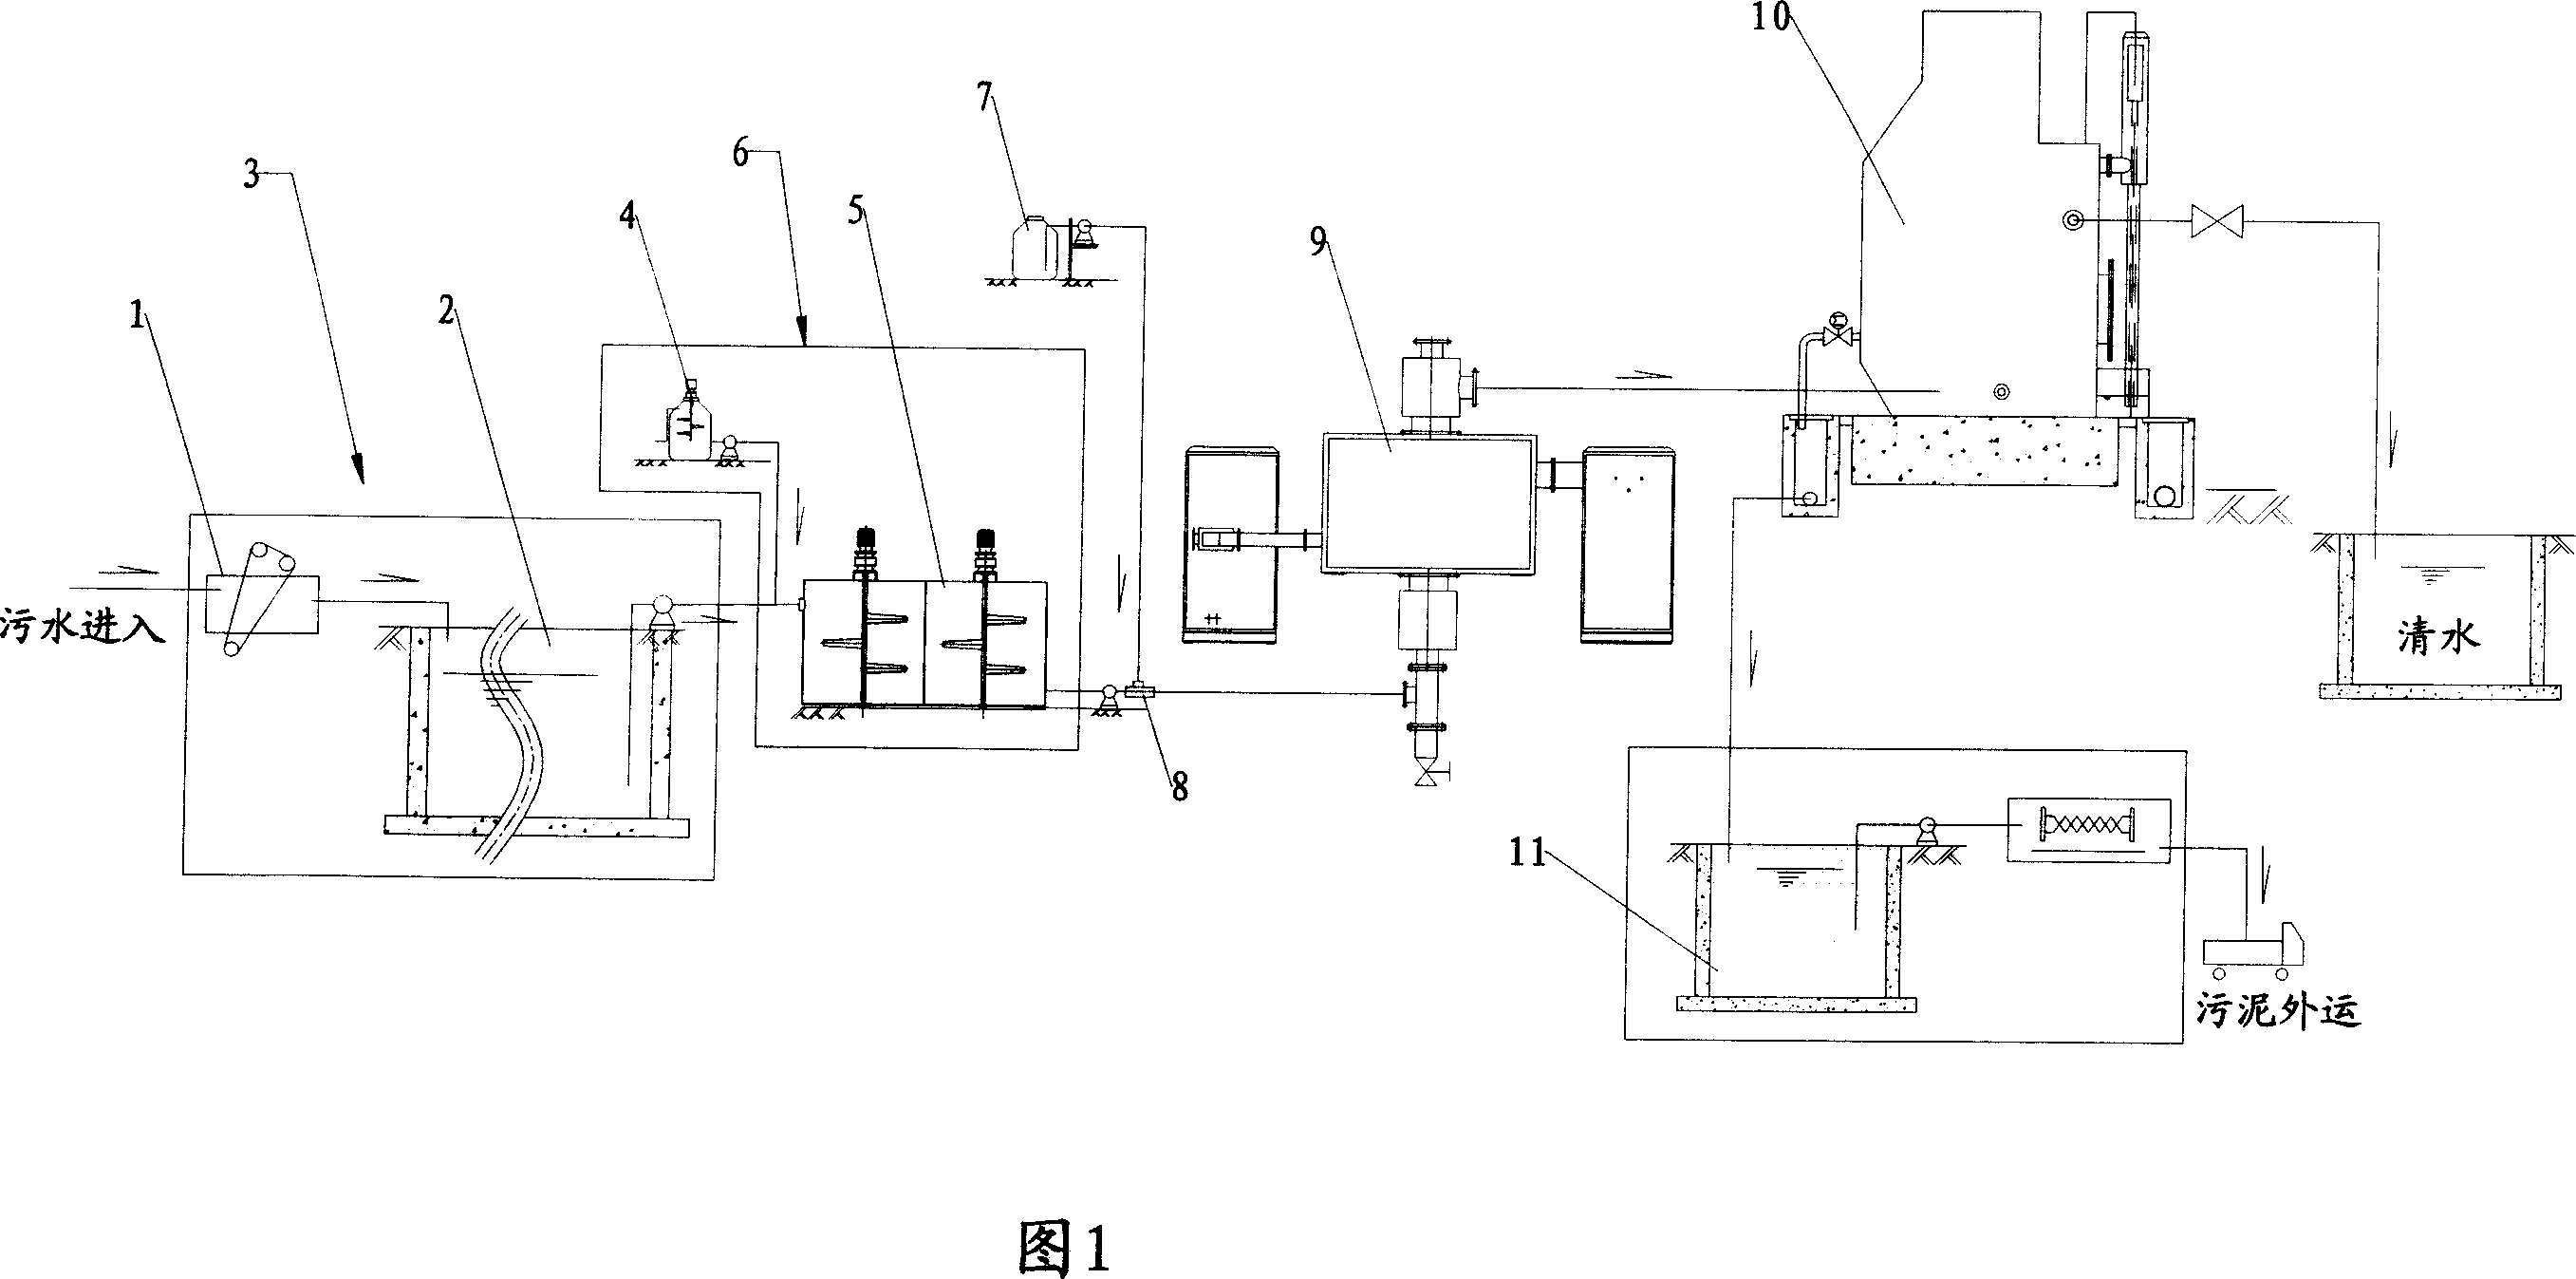 Method for processing sewage by microwave chemistry and corresponding system